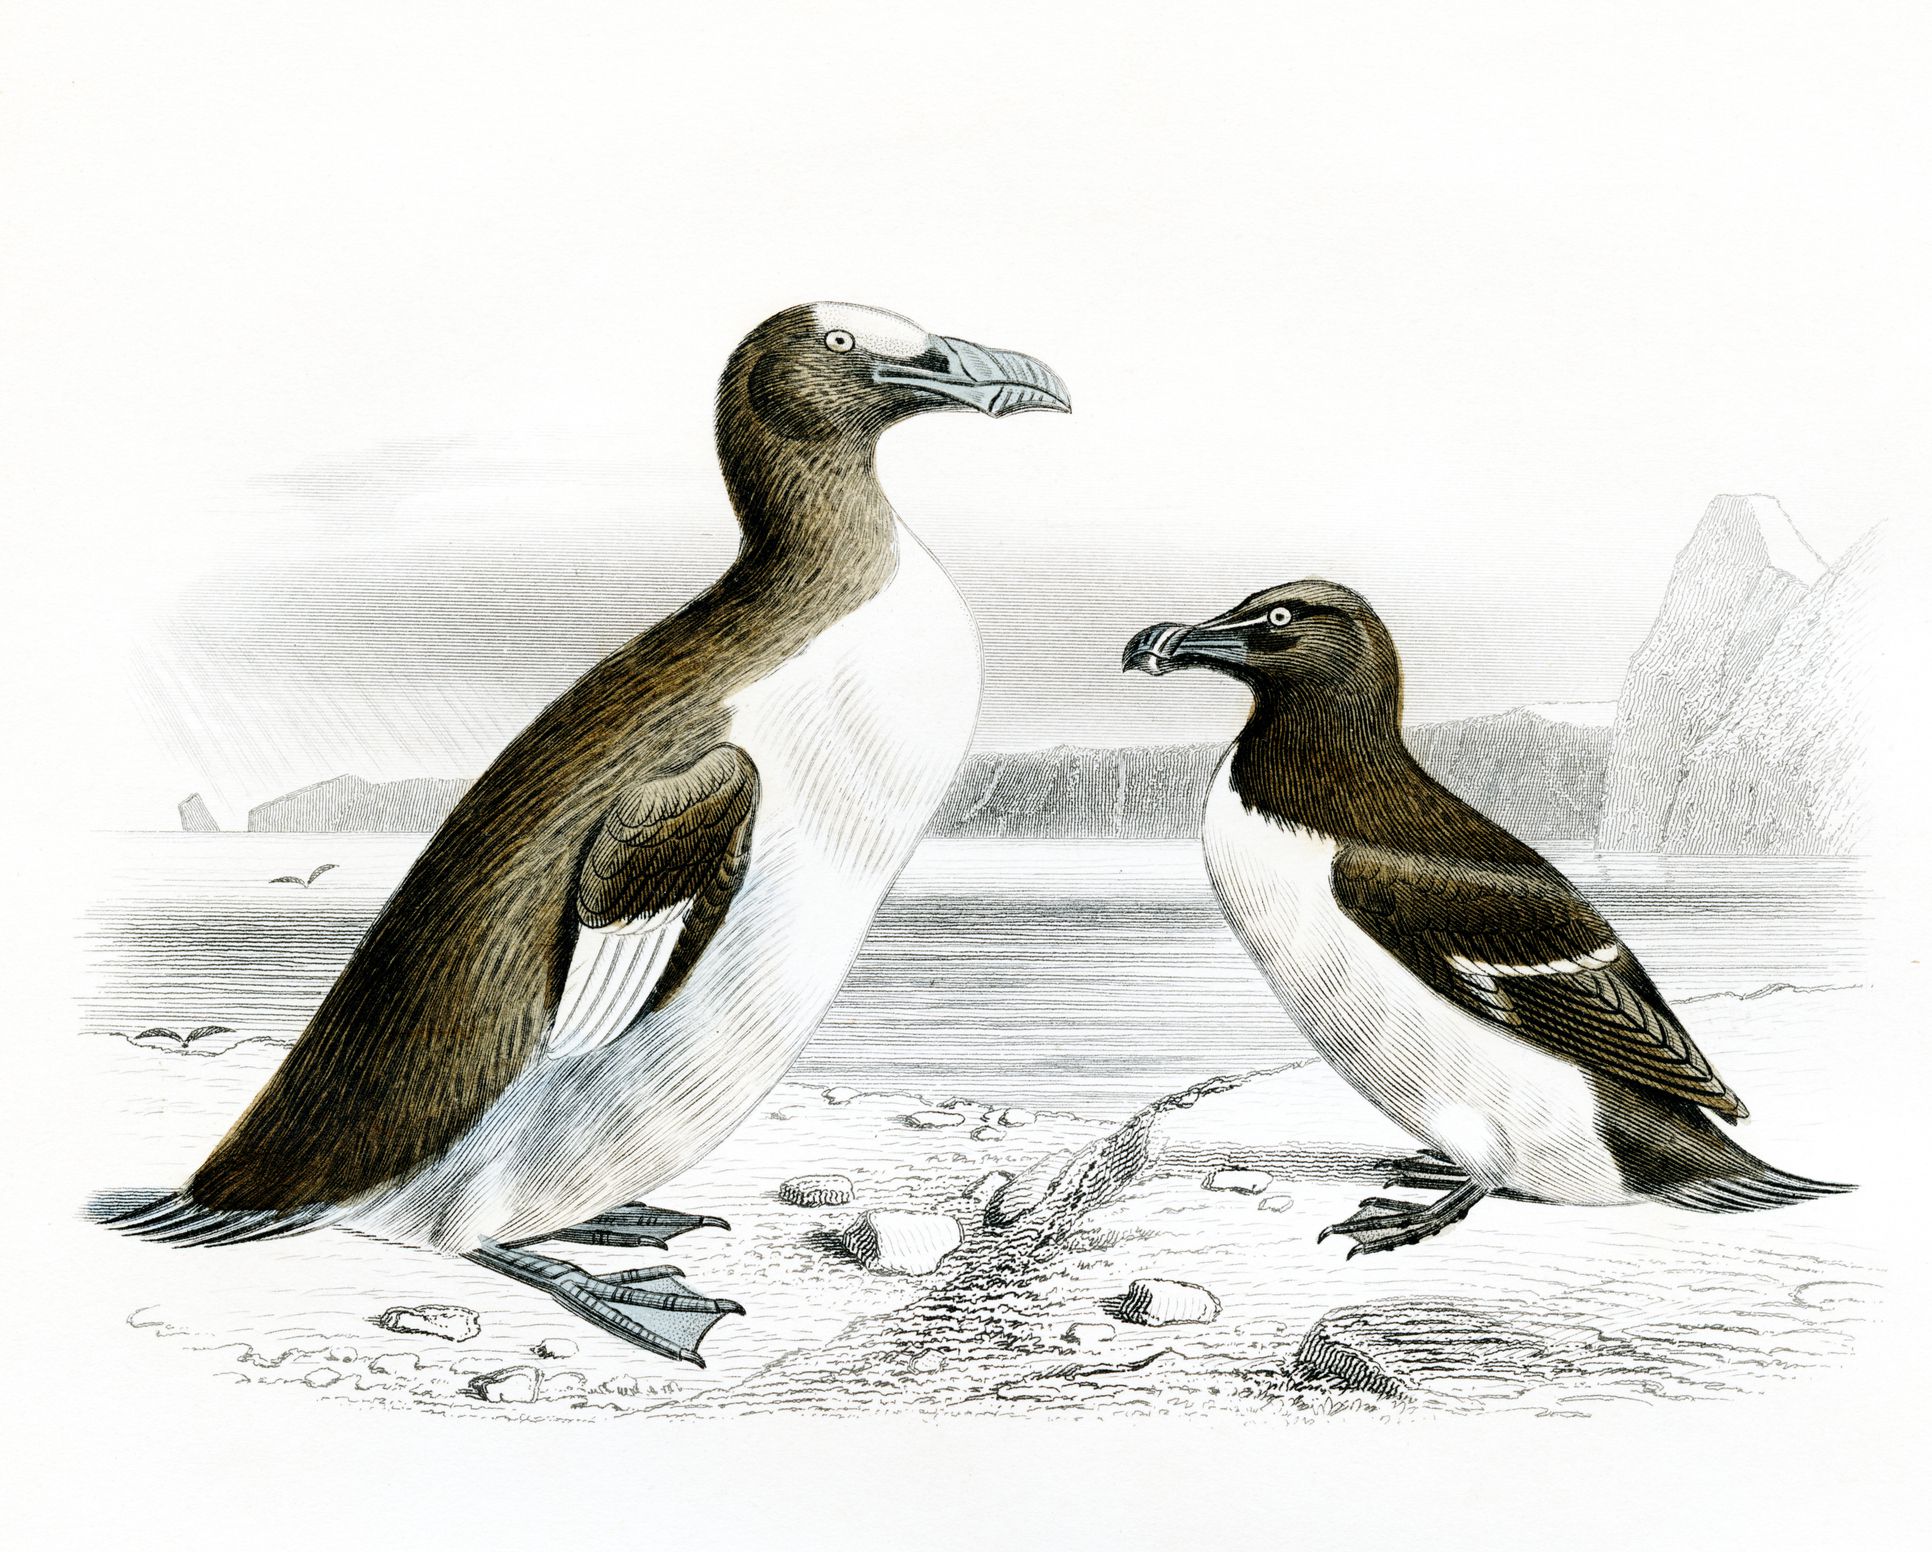 <p>The Great Auk, a flightless bird, was hunted to <a href="https://education.nationalgeographic.org/resource/great-auks-become-extinct/">total extinction by 1844</a>. Over-hunted for their feathers, meat, and oil, their <a href="https://johnjames.audubon.org/extinction-great-auk">population plummeted</a> for decades and were never given a chance to recover. The destruction of their breeding colonies and habitat also played a significant role in their demise. The extinction of the Great Auk is a tragic reminder of how overexploitation can wipe out entire species.</p>